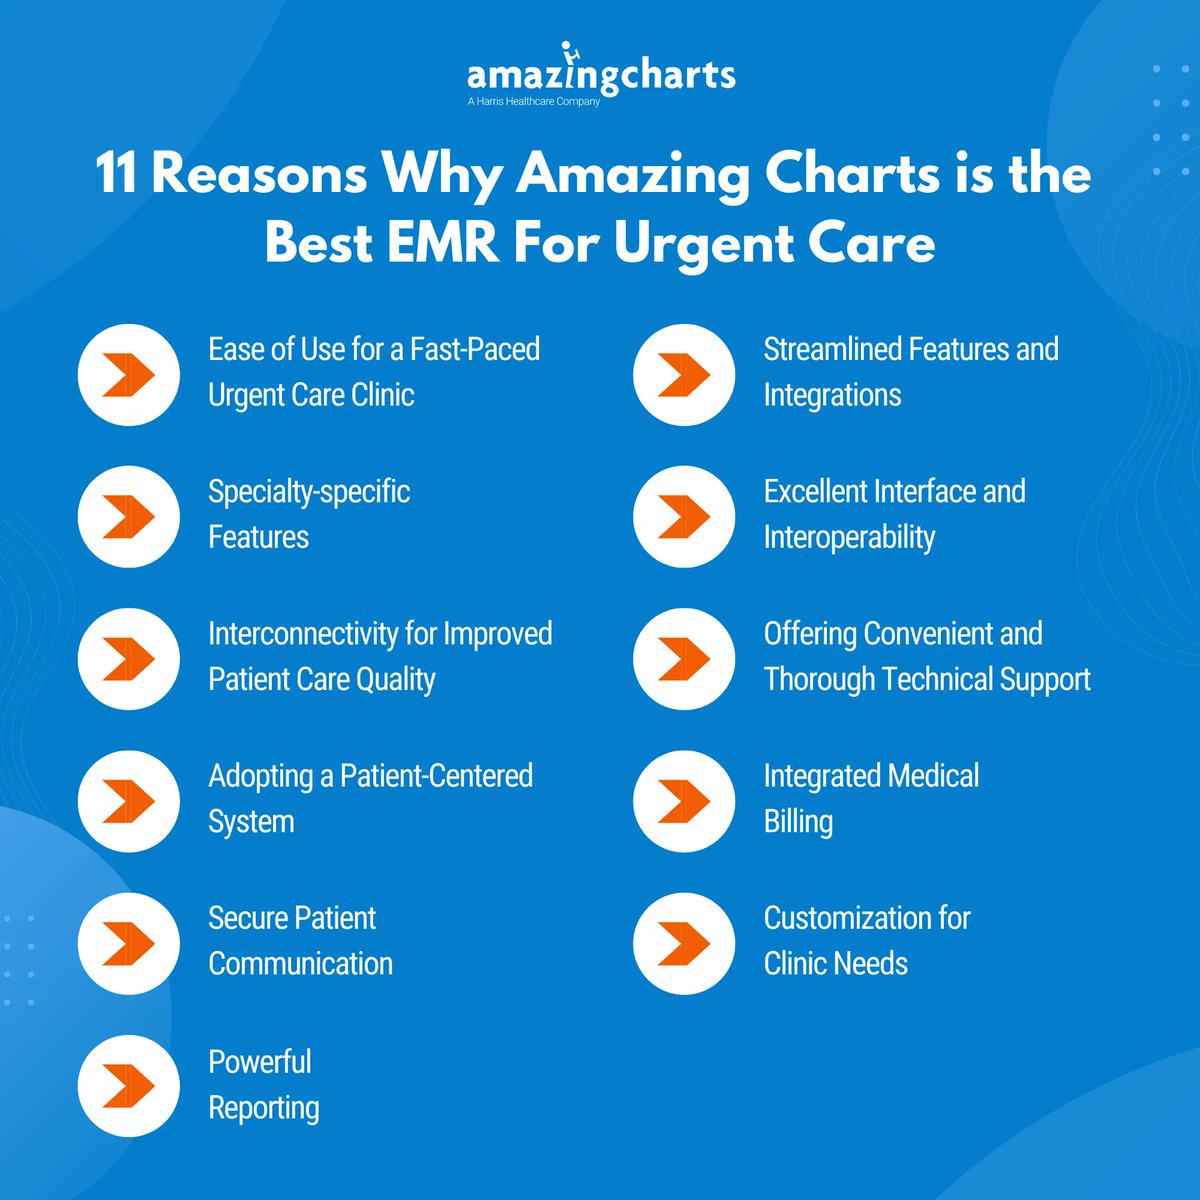 Discover the top 11 reasons why Amazing Charts is the best EMR for urgent care: buff.ly/3Zh5Bnn 

#UrgentCare #EMRSoftware #healthcareblogs #emr #healthcare #AmazingCharts #WeAreHarris